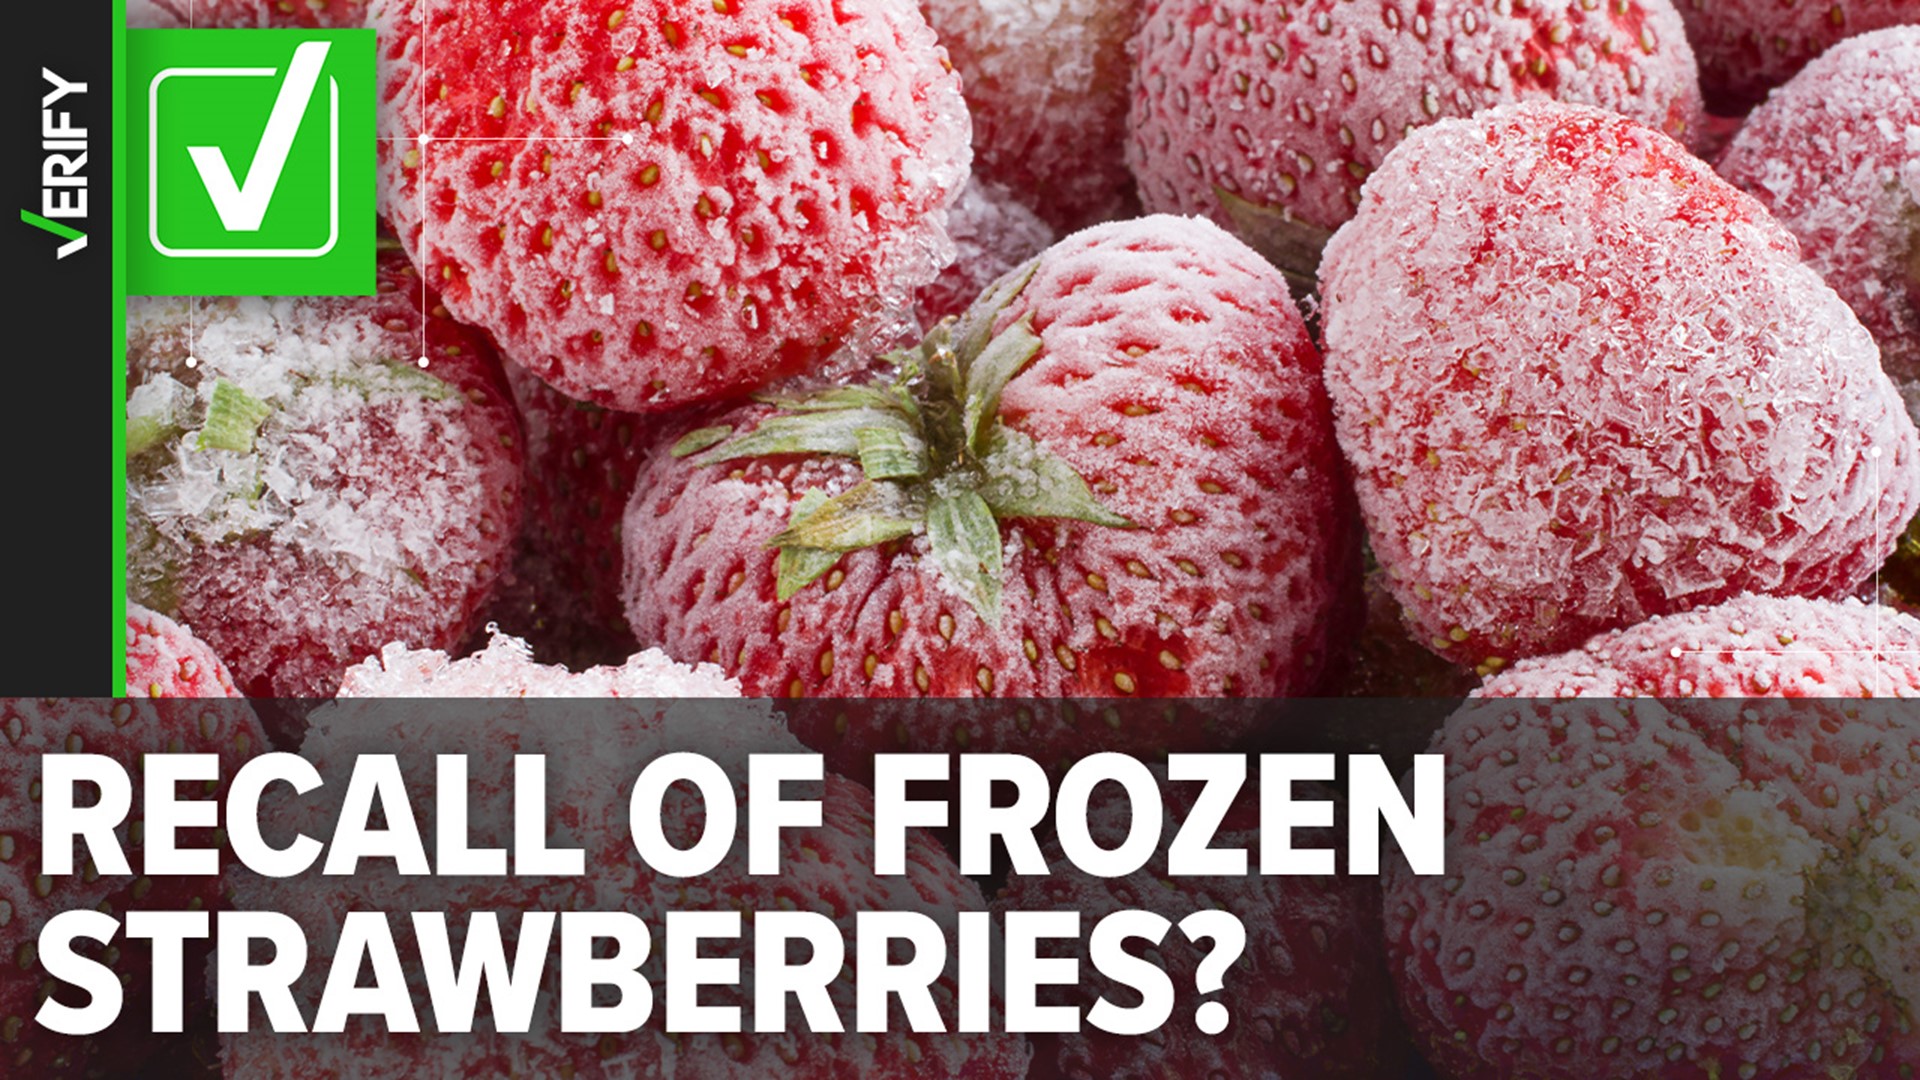 Multiple brands and products with frozen organic strawberries sold in Walmart, Costco and HEB were part of two recalls in June 2023.